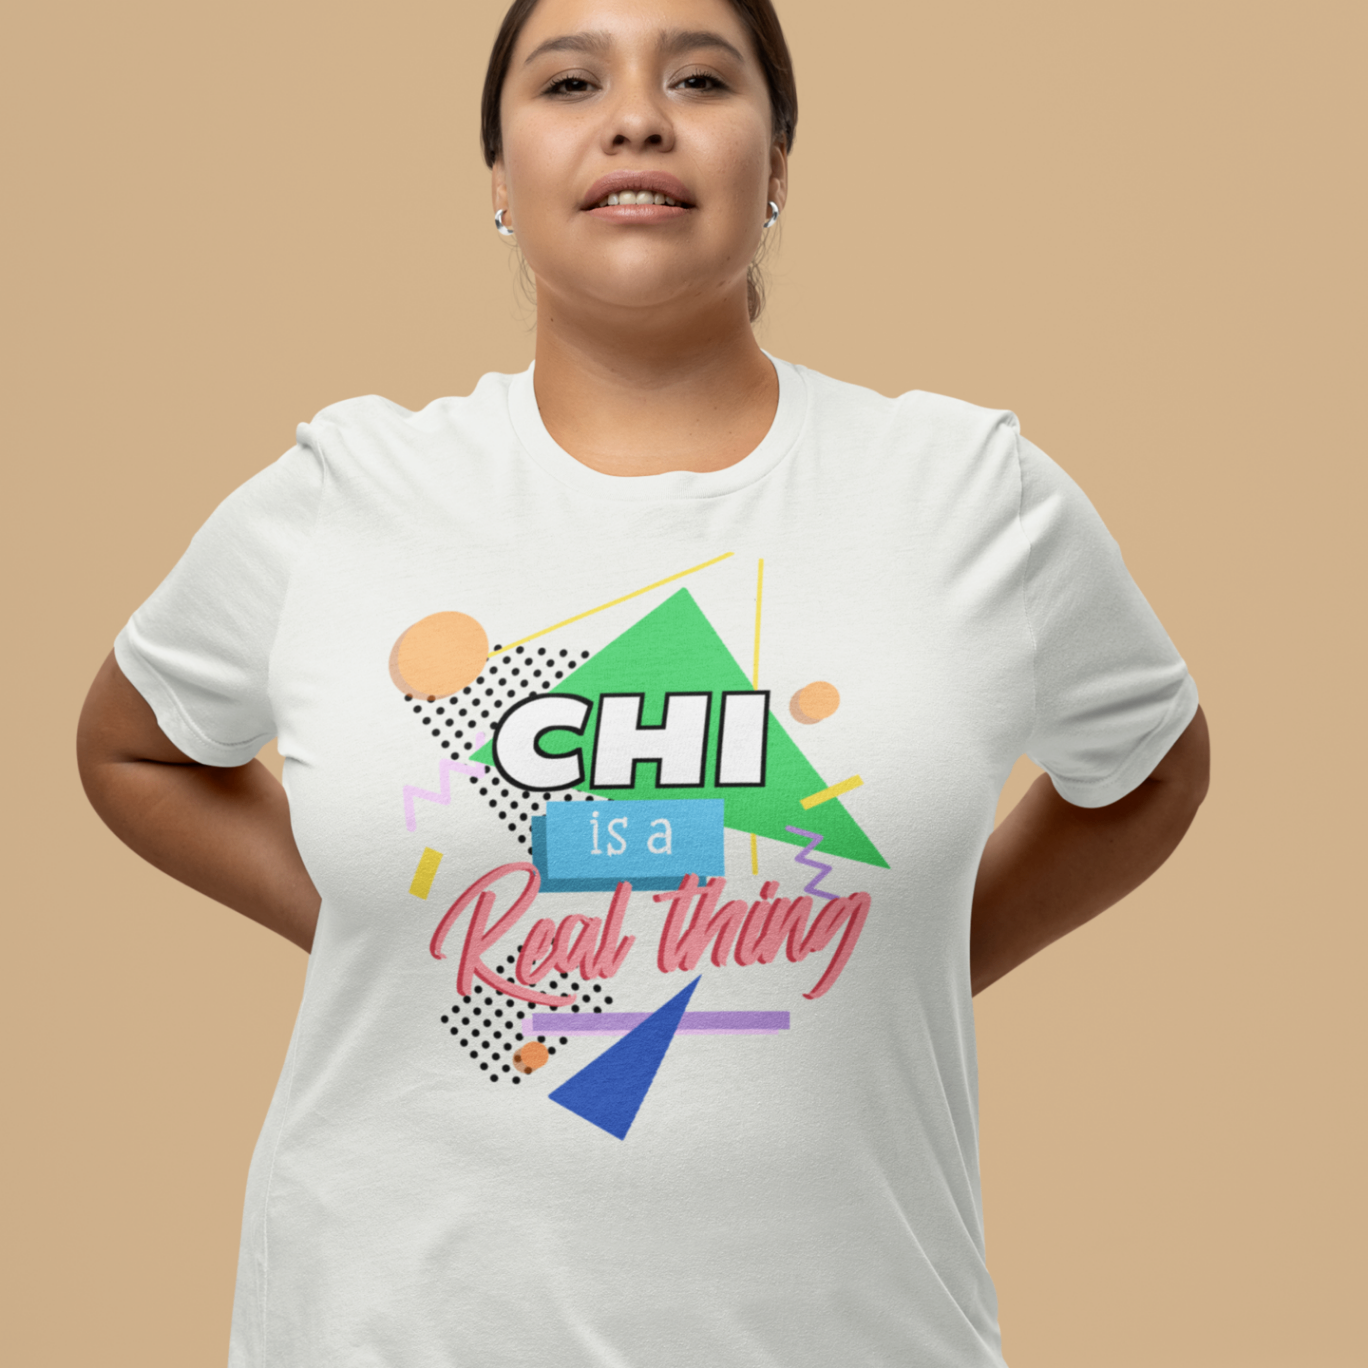 white t-shirt 'Chi is a real thing' design female model studio mockup